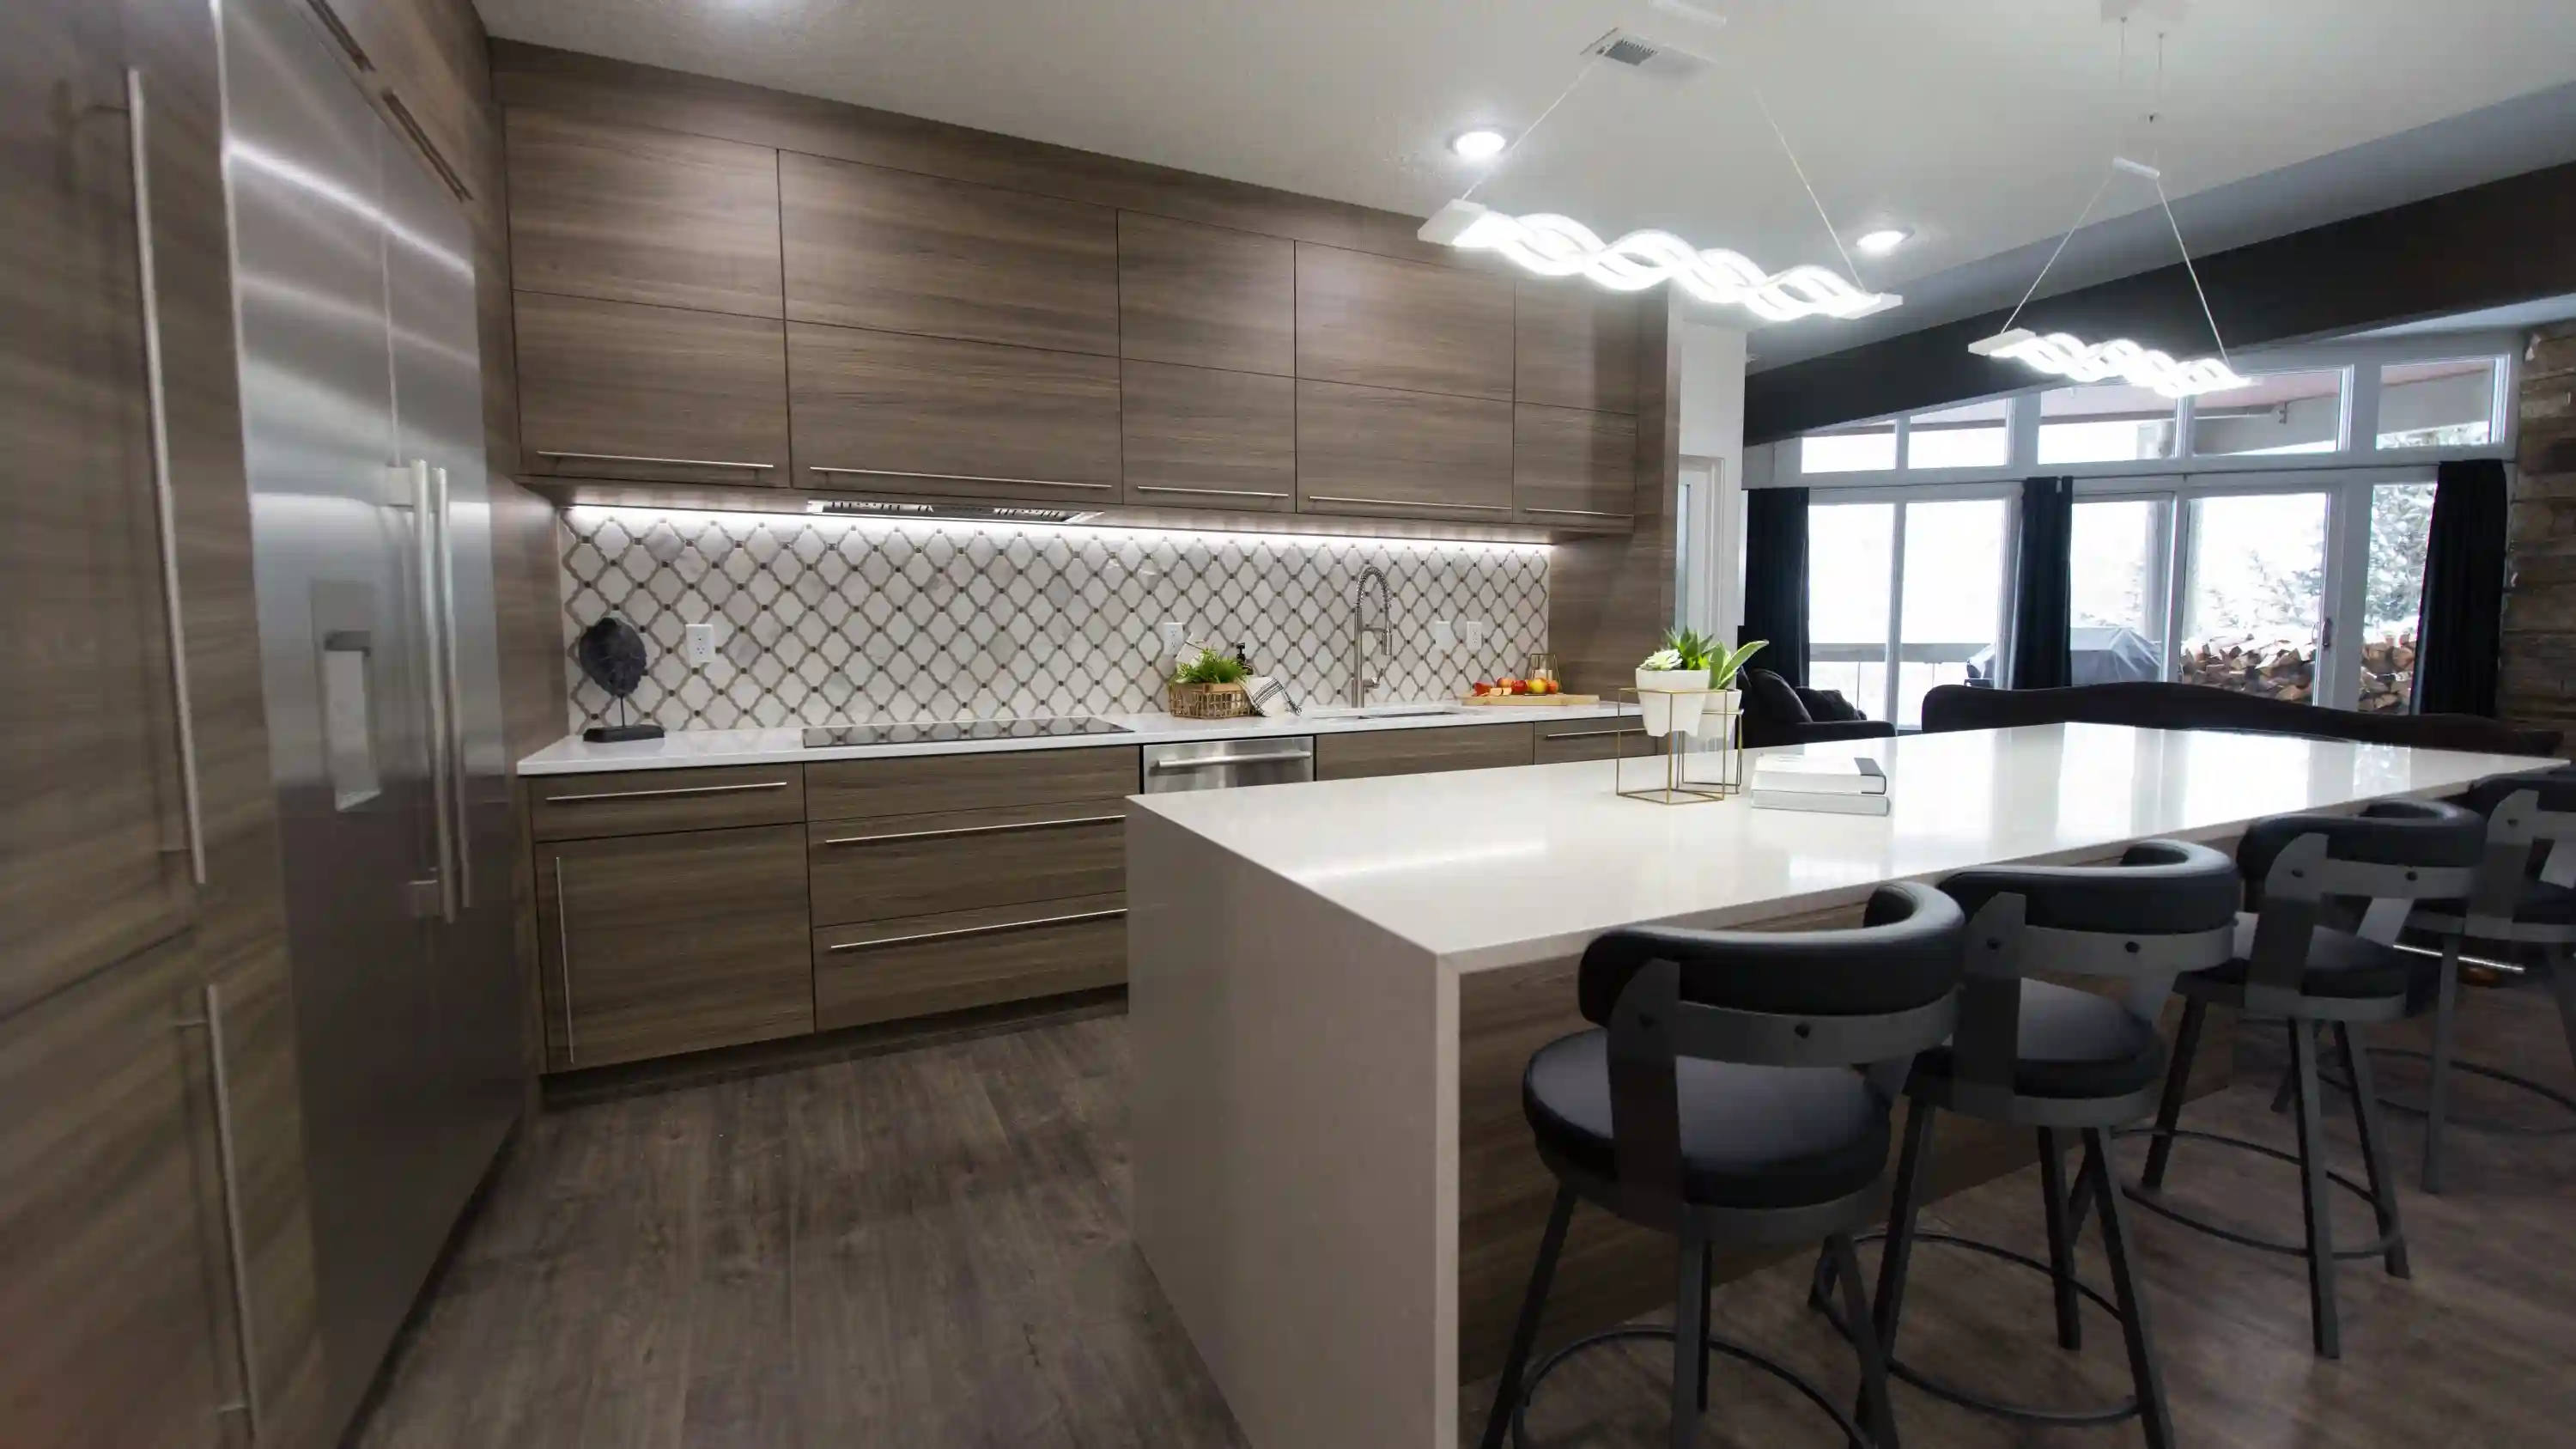 A newly remodeled kitchen. A mosaic tile back splash is lit up by lights lining under the cabinetry. White countertops contrast against mixed wood toned cabinetry. A kitchen isladn with a quartz top stands out. Two statement lights hang over the island in a wavy pattern.